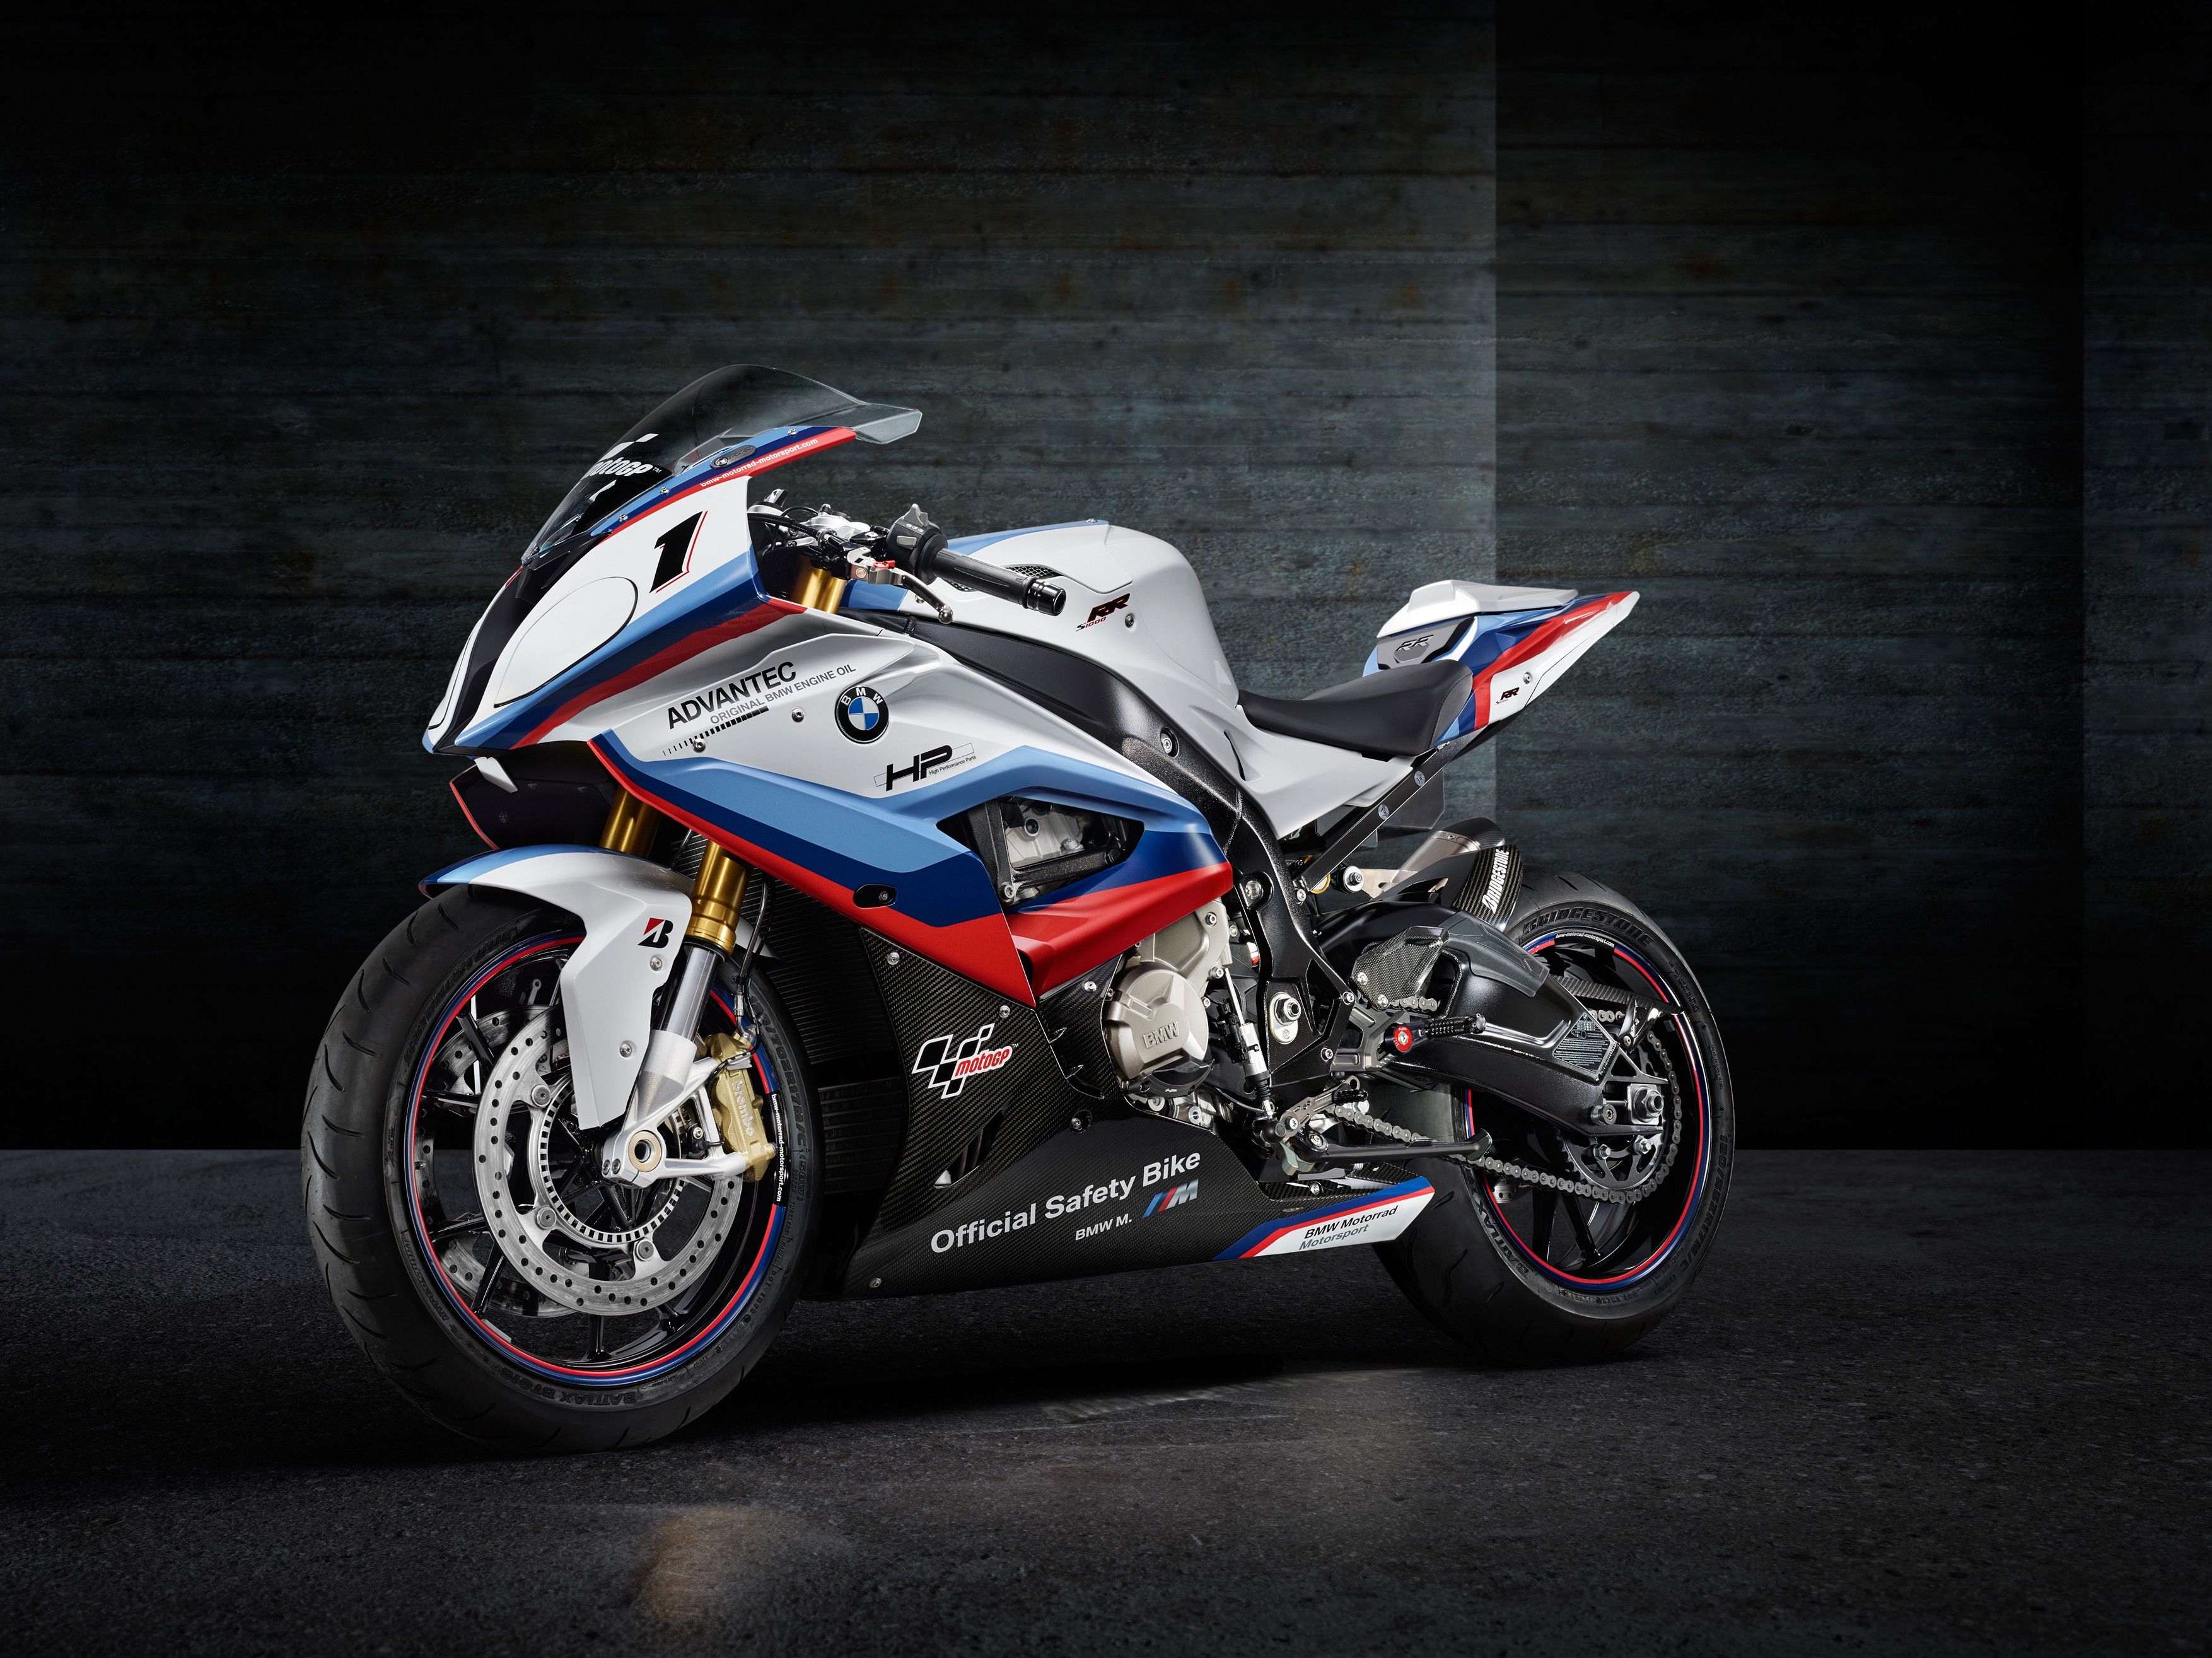 Motorcycle BMW S1000RR, 2017 wallpapers and image